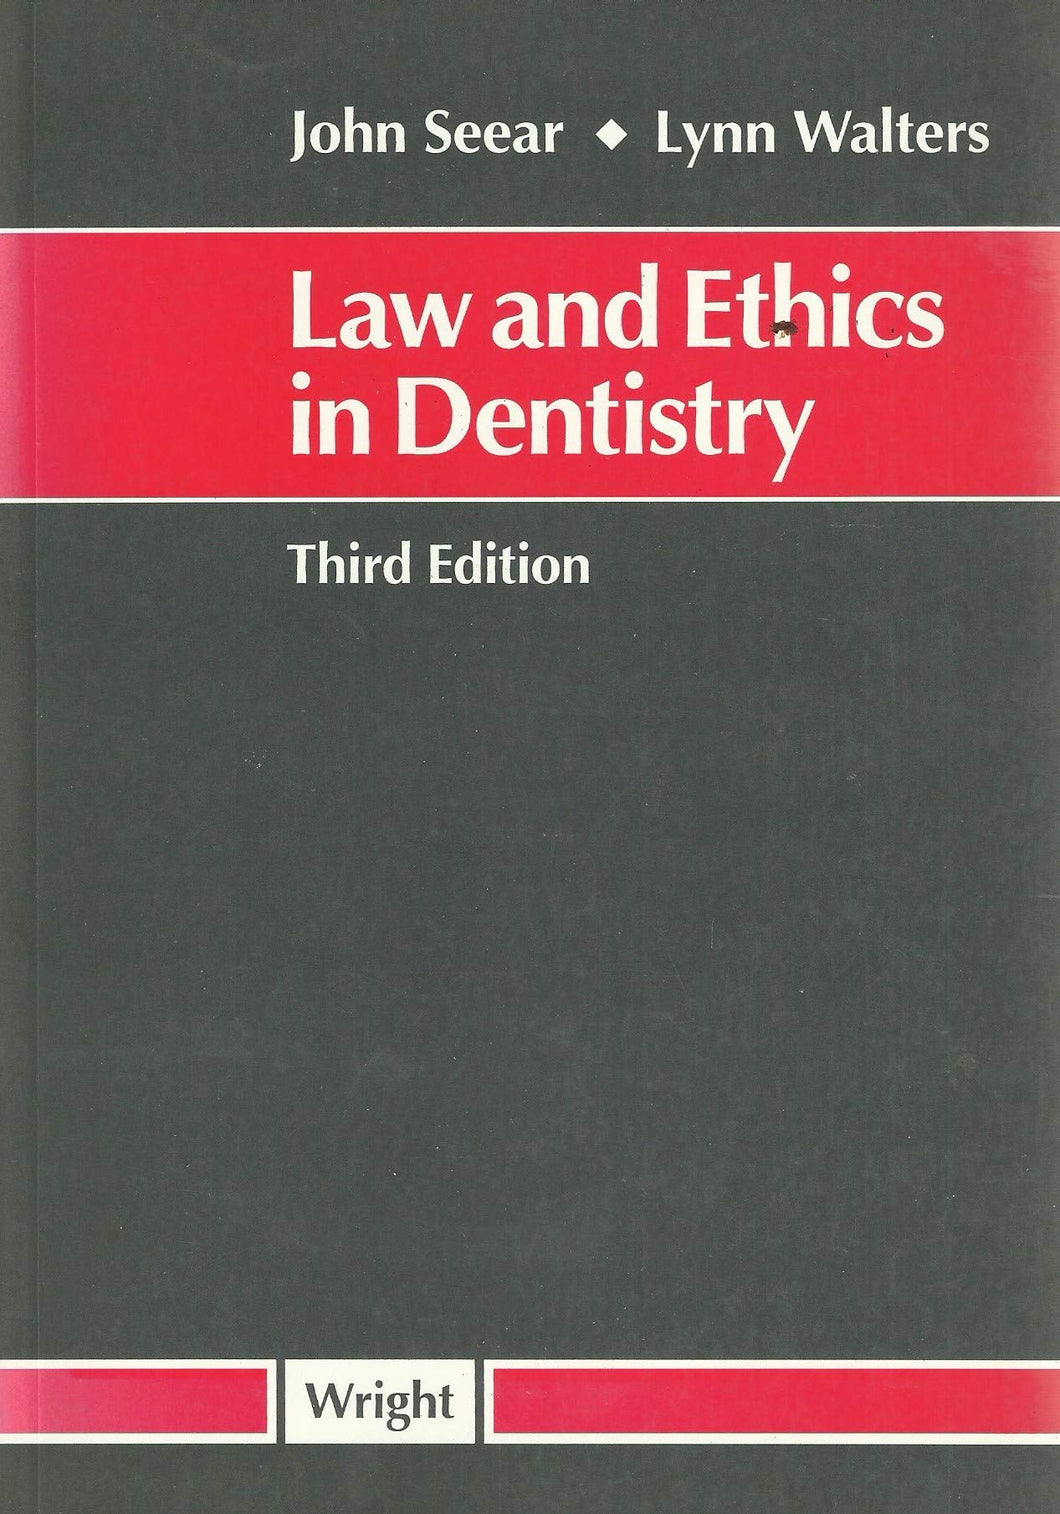 Law and Ethics in Dentistry